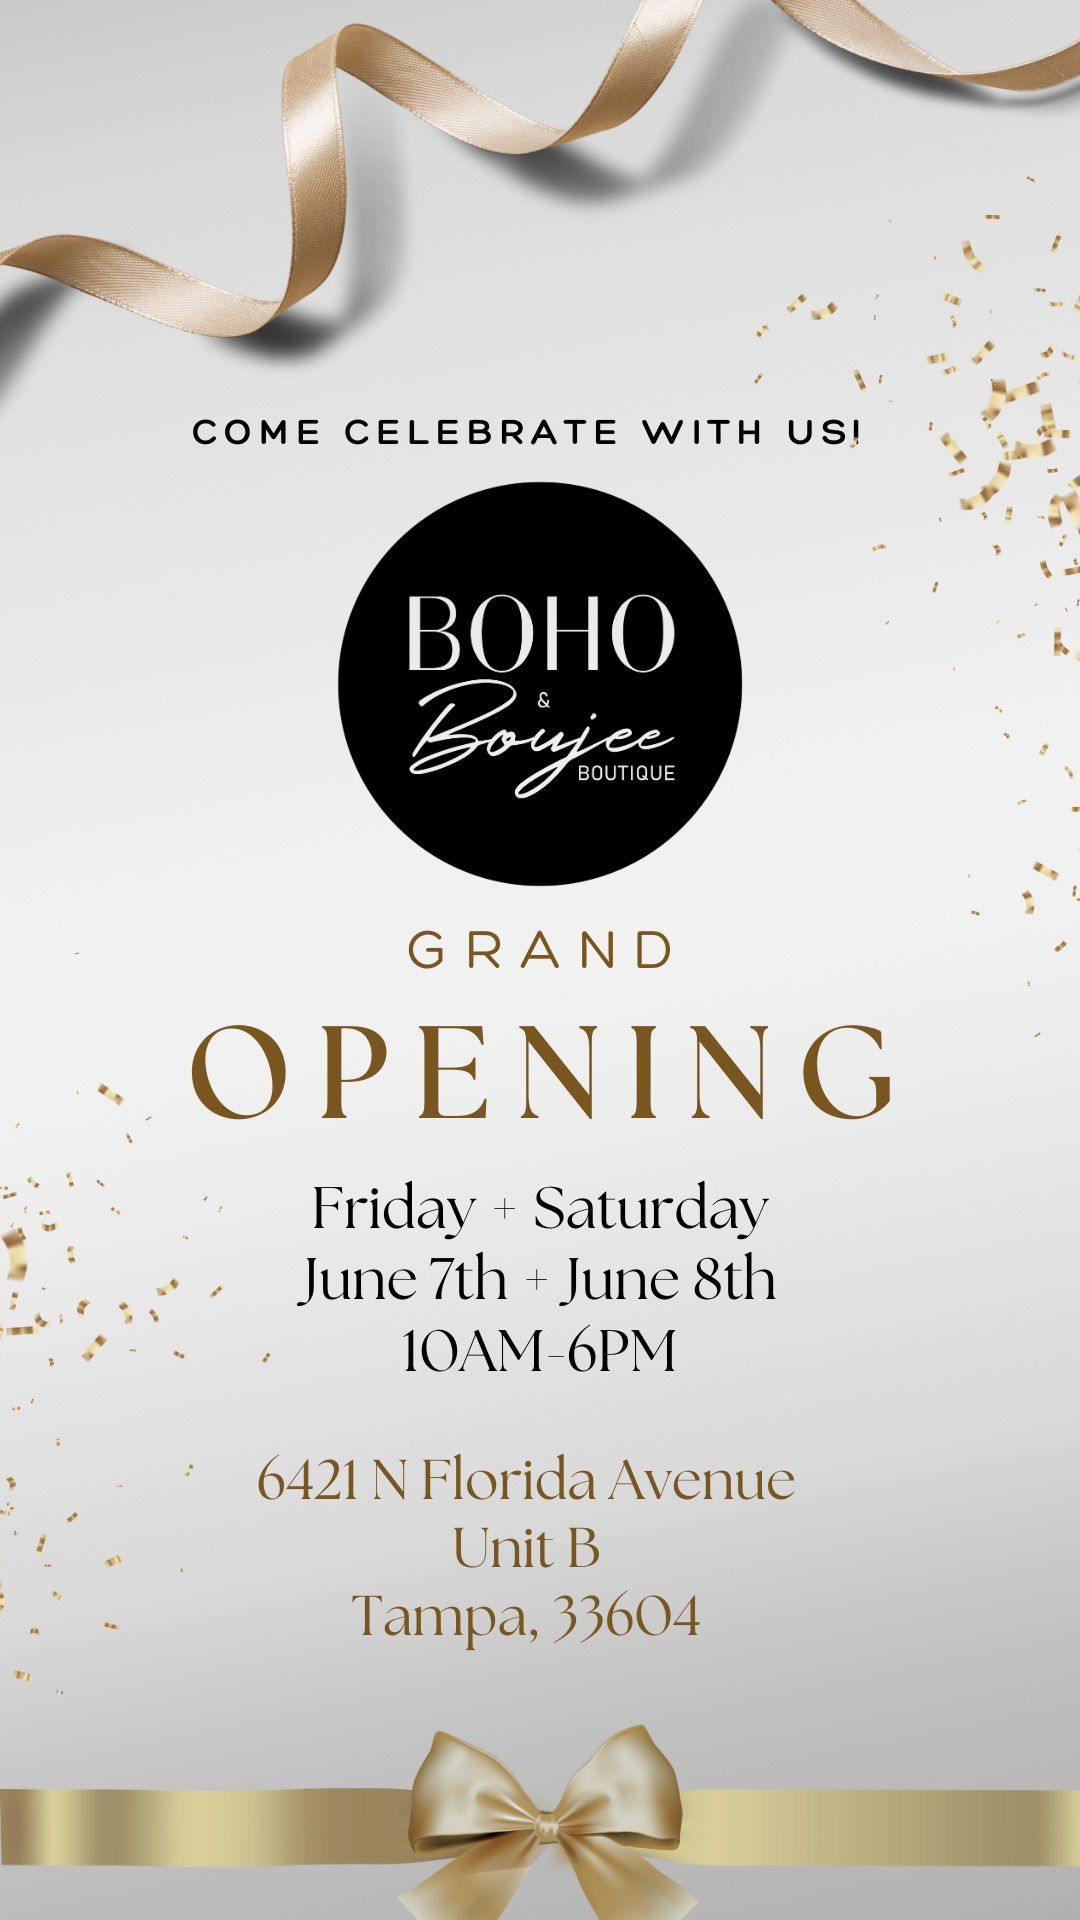 Boho & Boujee Boutique Grand Opening 